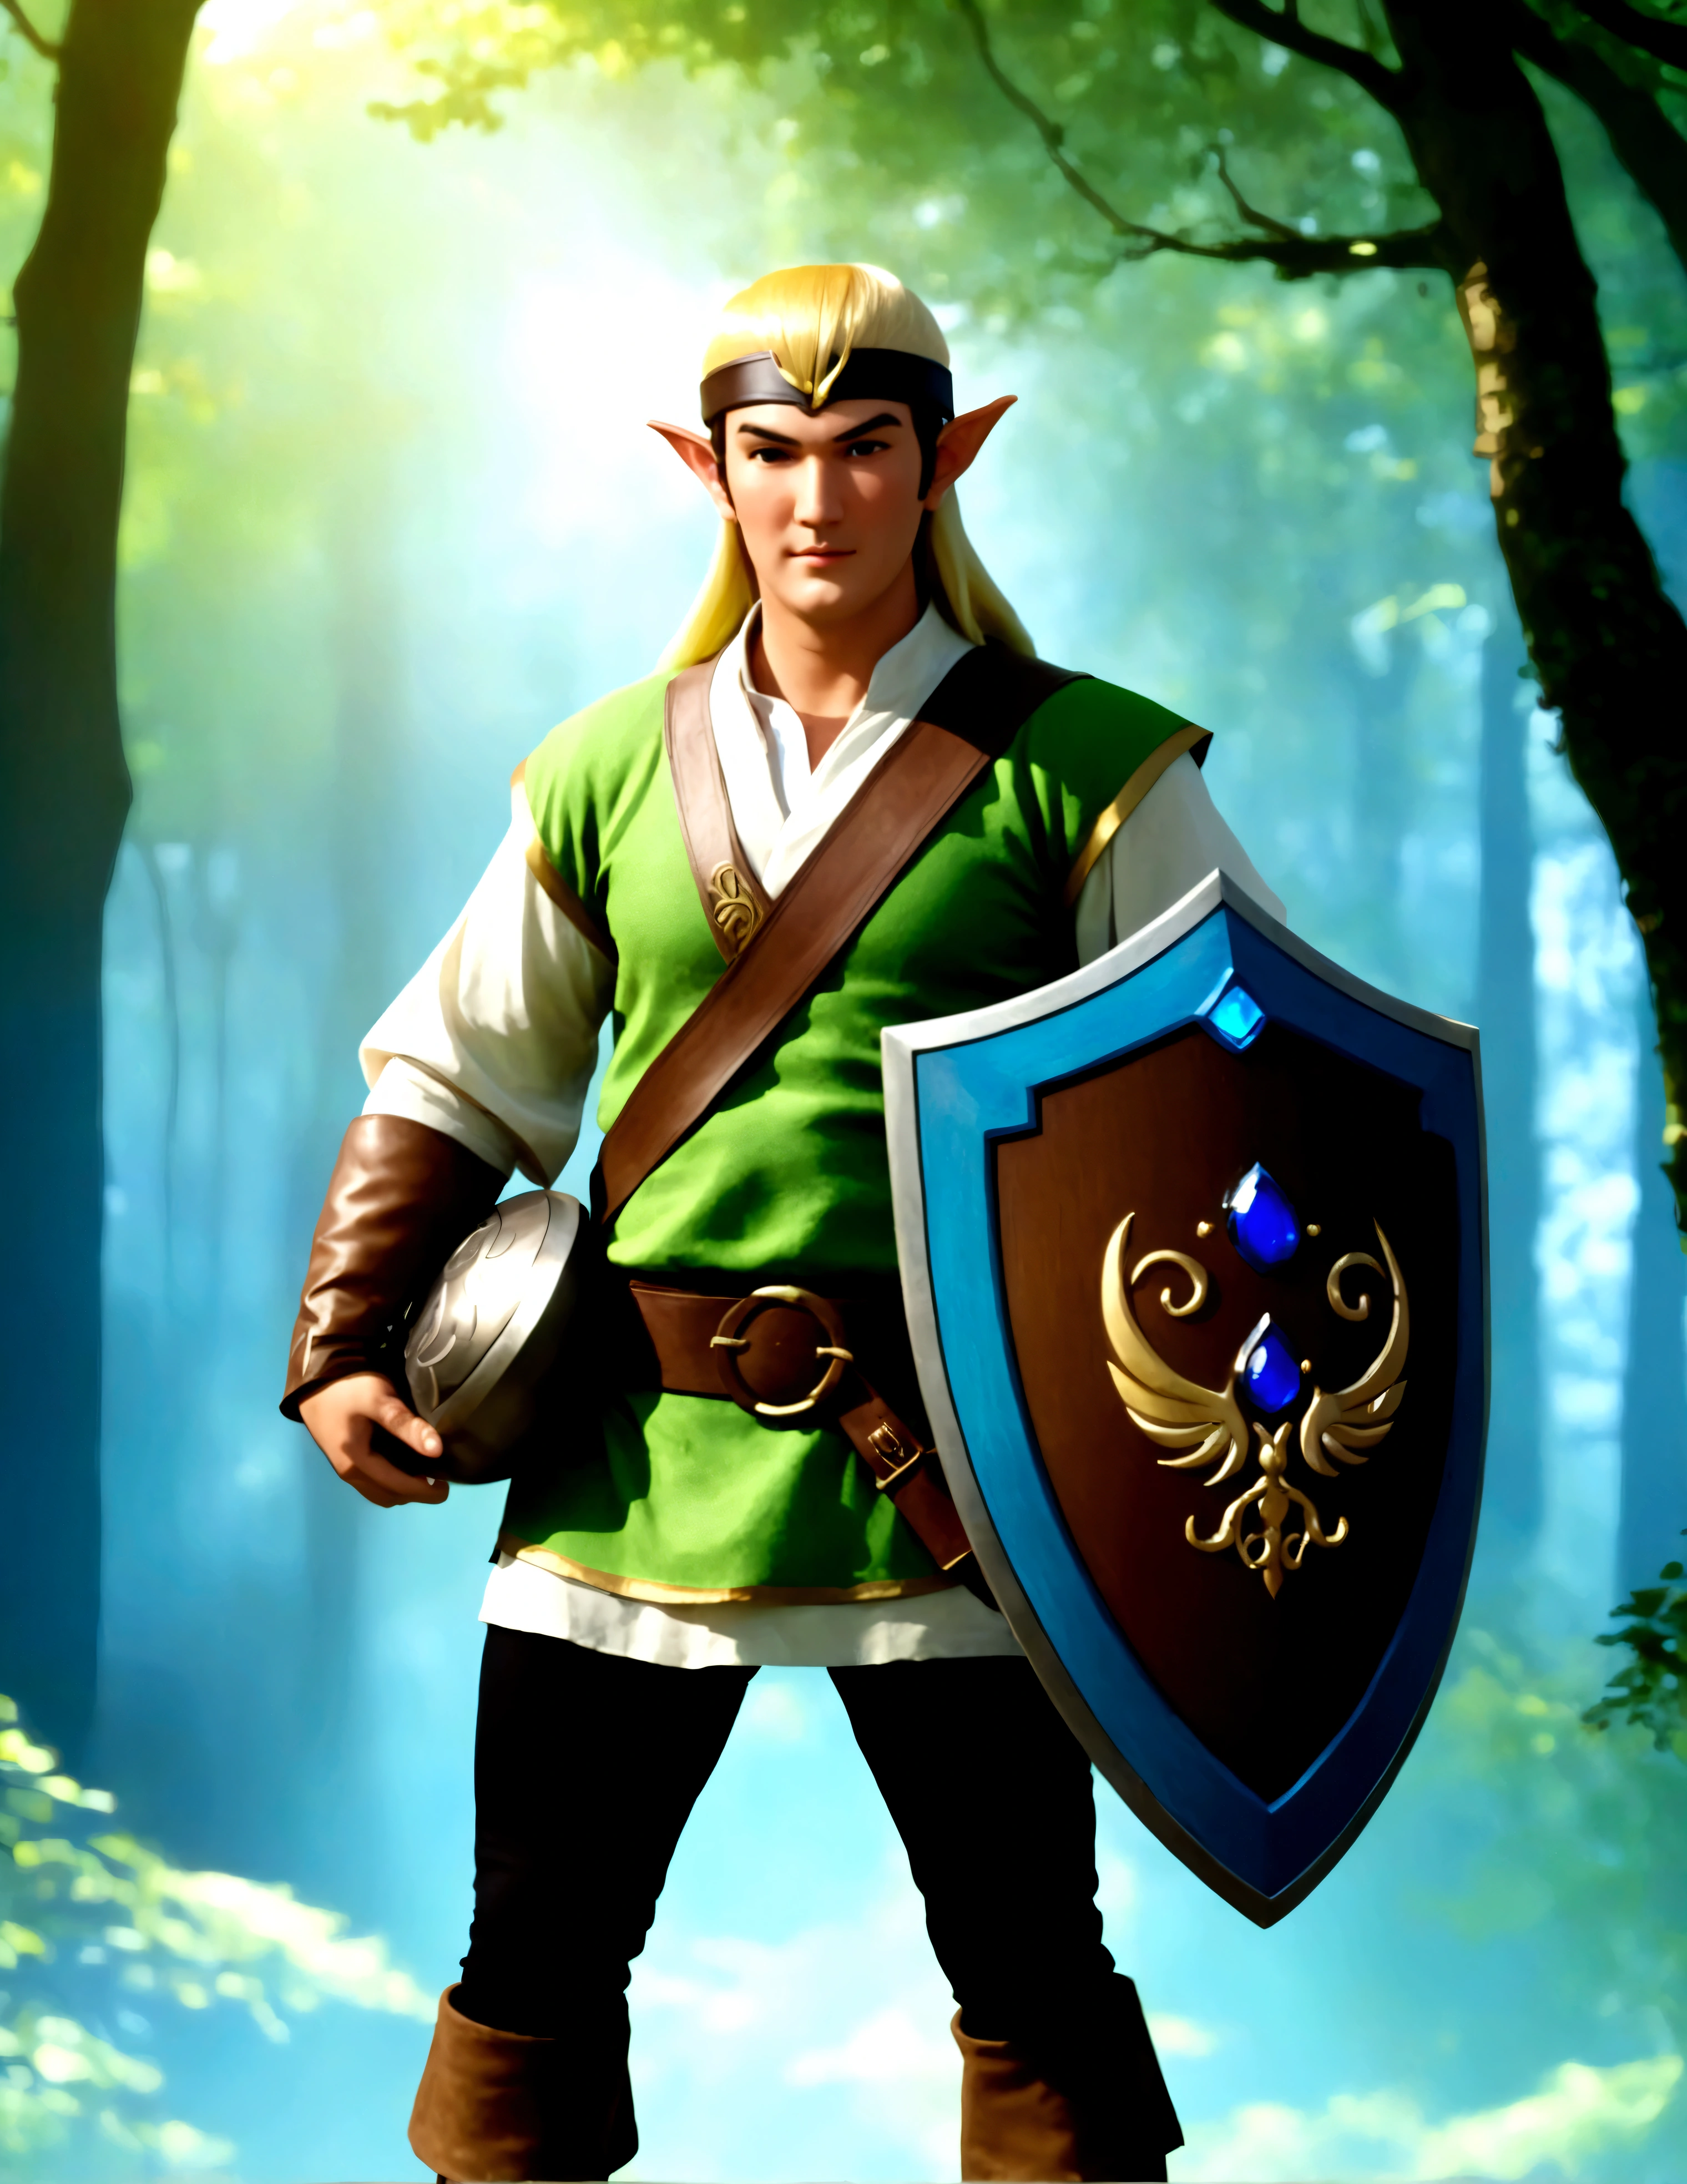 Steven Seagal (current, modern, big belly) in the role of Link (Link costume, elf ears, blonde wig over black hair, Link's shield on arm), akido pose, forest. Small magic fairy hovers nearby blue aura
